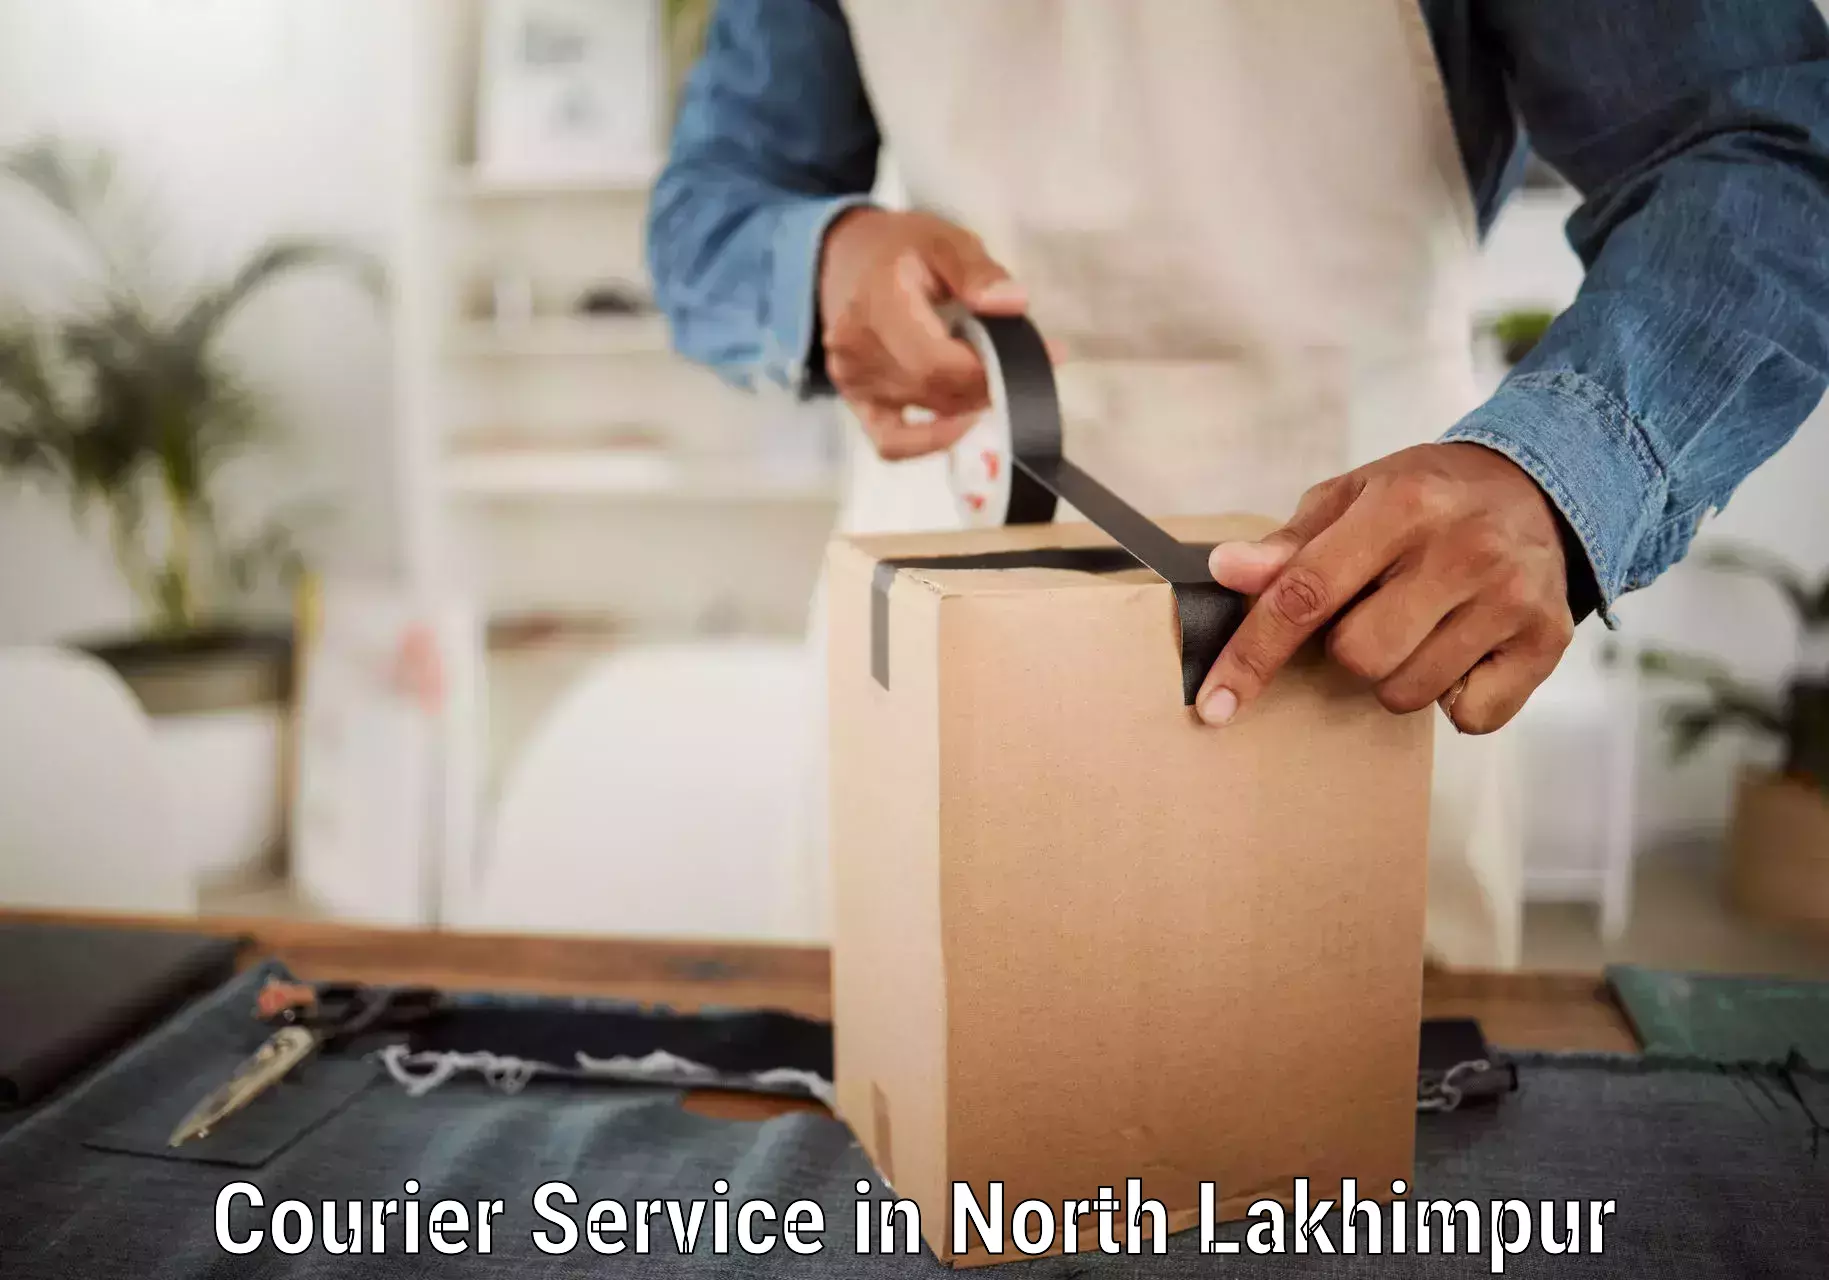 High-quality delivery services in North Lakhimpur